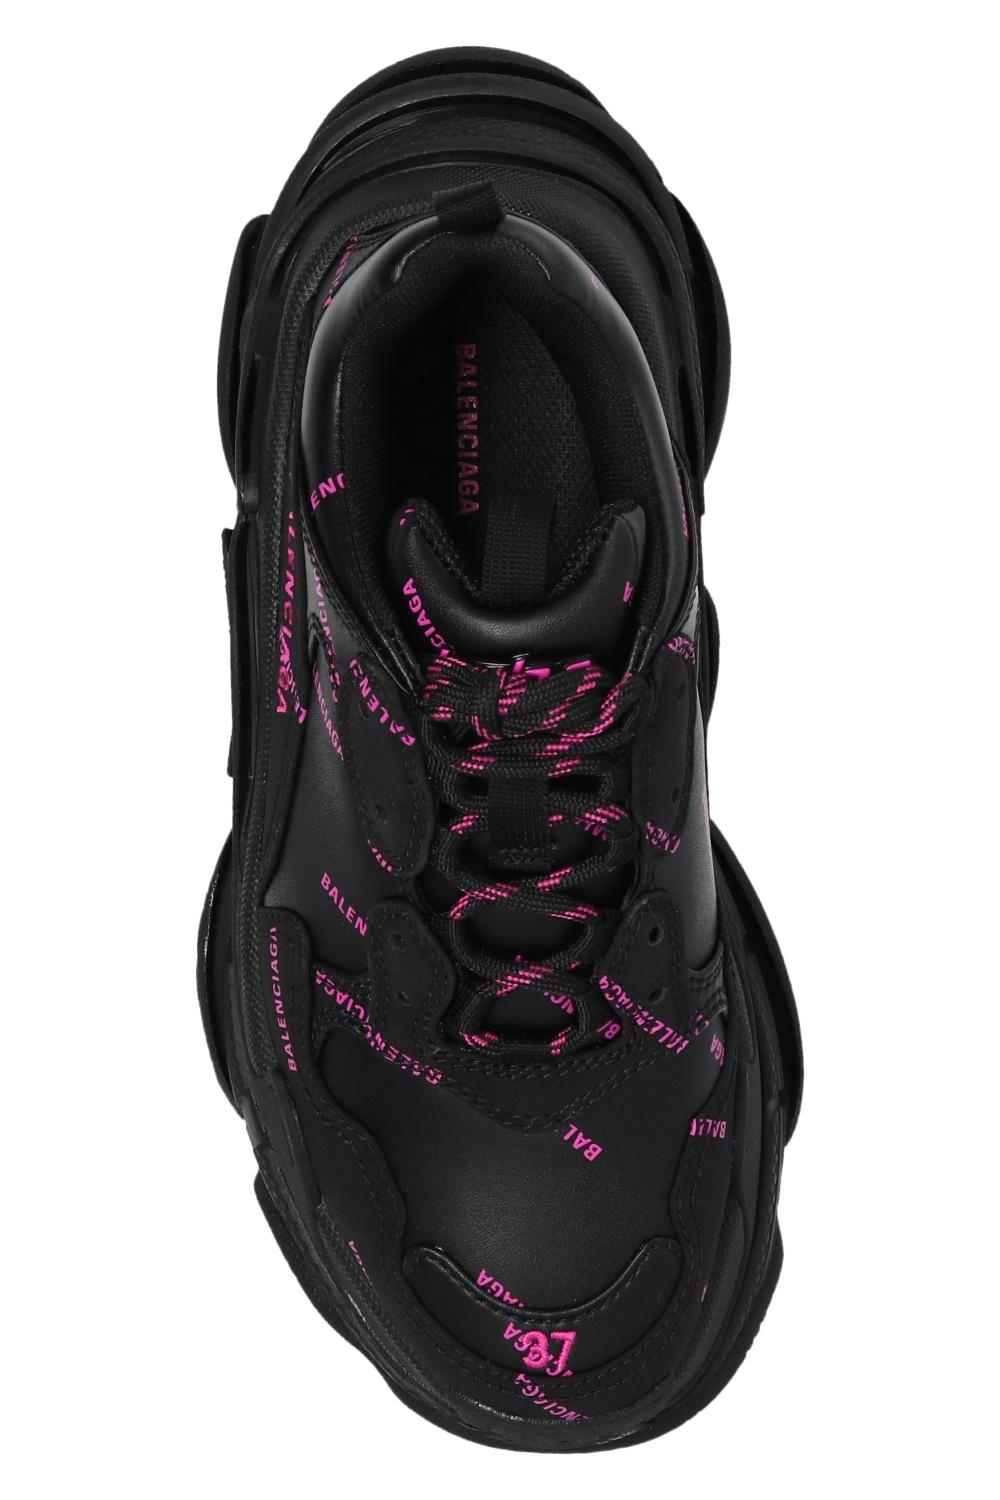 Balenciaga Synthetic Triple S All Over Logo Sneakers Black/pink - Save 49%  - Lyst